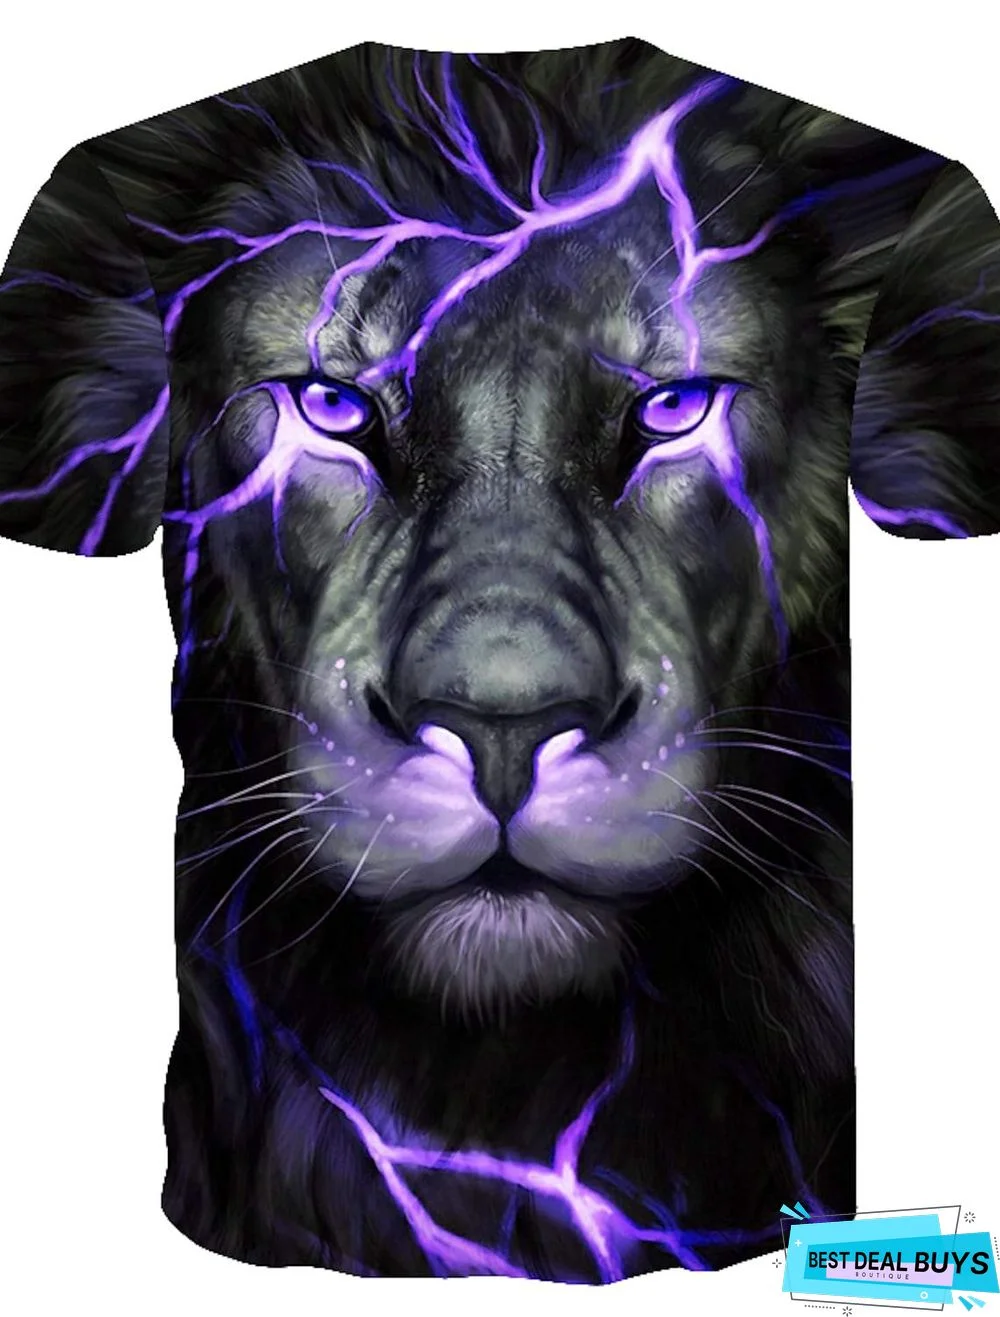 Men's Tee T-Shirt 3D Print Graphic Lion Animal Plus Size Print Short Sleeve Causal Tops Streetwear Exaggerated